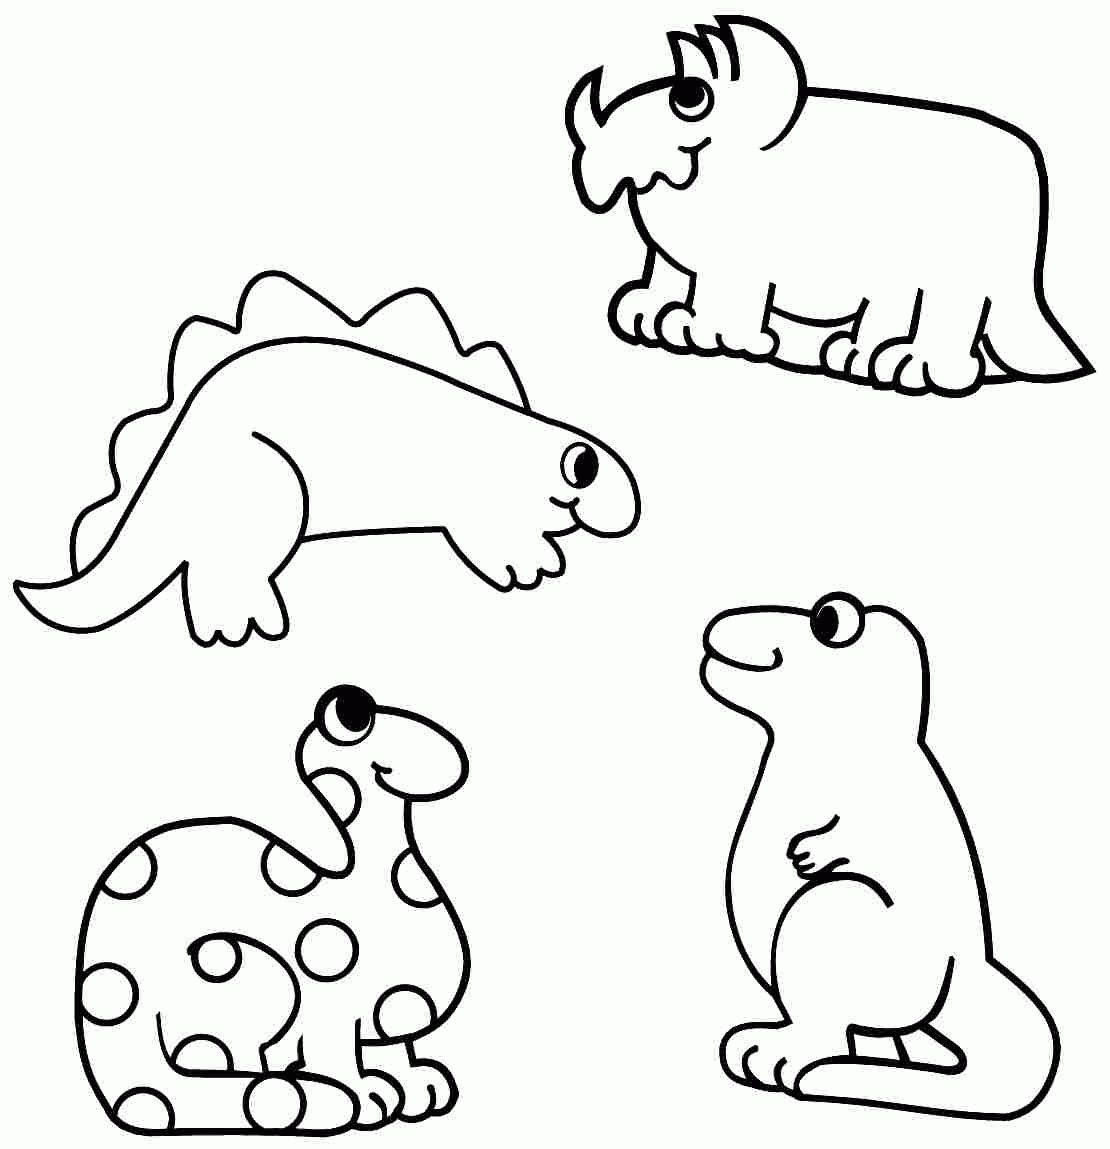 Free Easter Dinosaur Coloring Pages, Download Free Easter Dinosaur